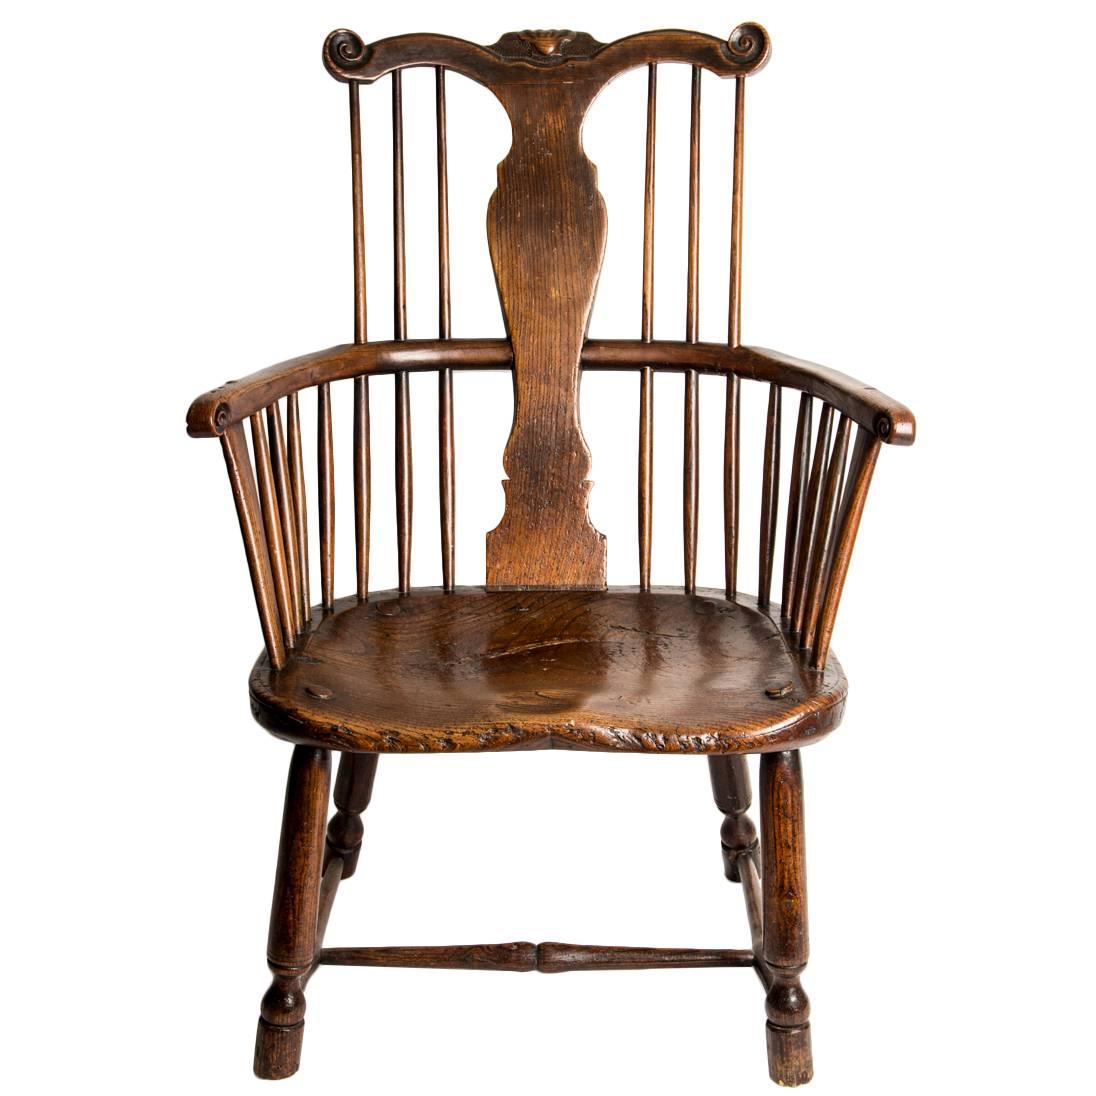 Thames Valley Fruitwood and Elm Windsor Chair, Early 18th Century